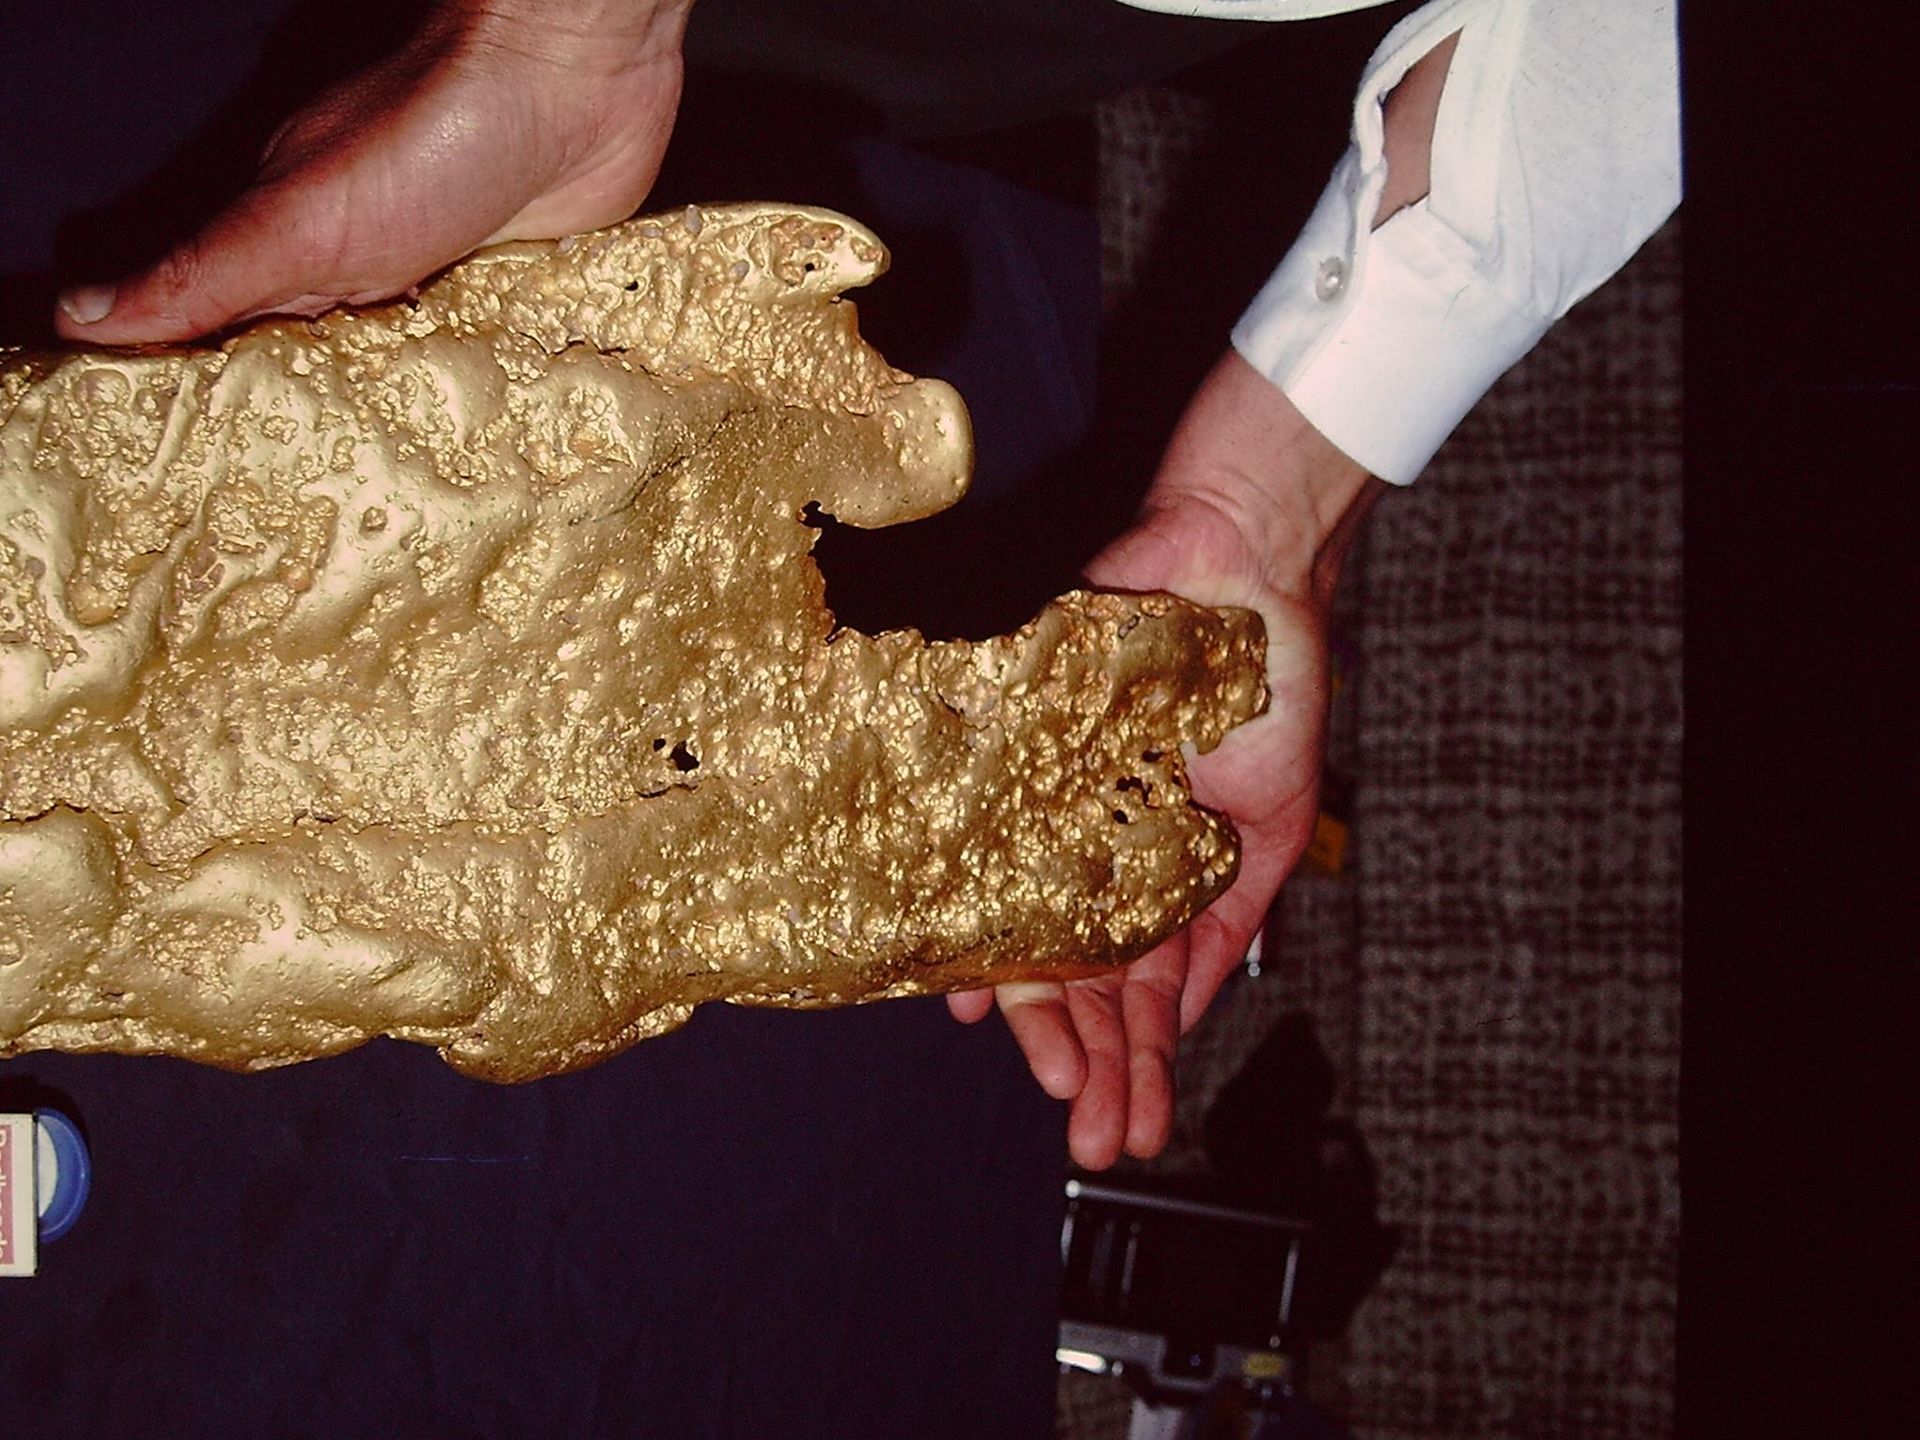 Largest Gold Nugget Found With a Metal Detector: The Hand of Faith